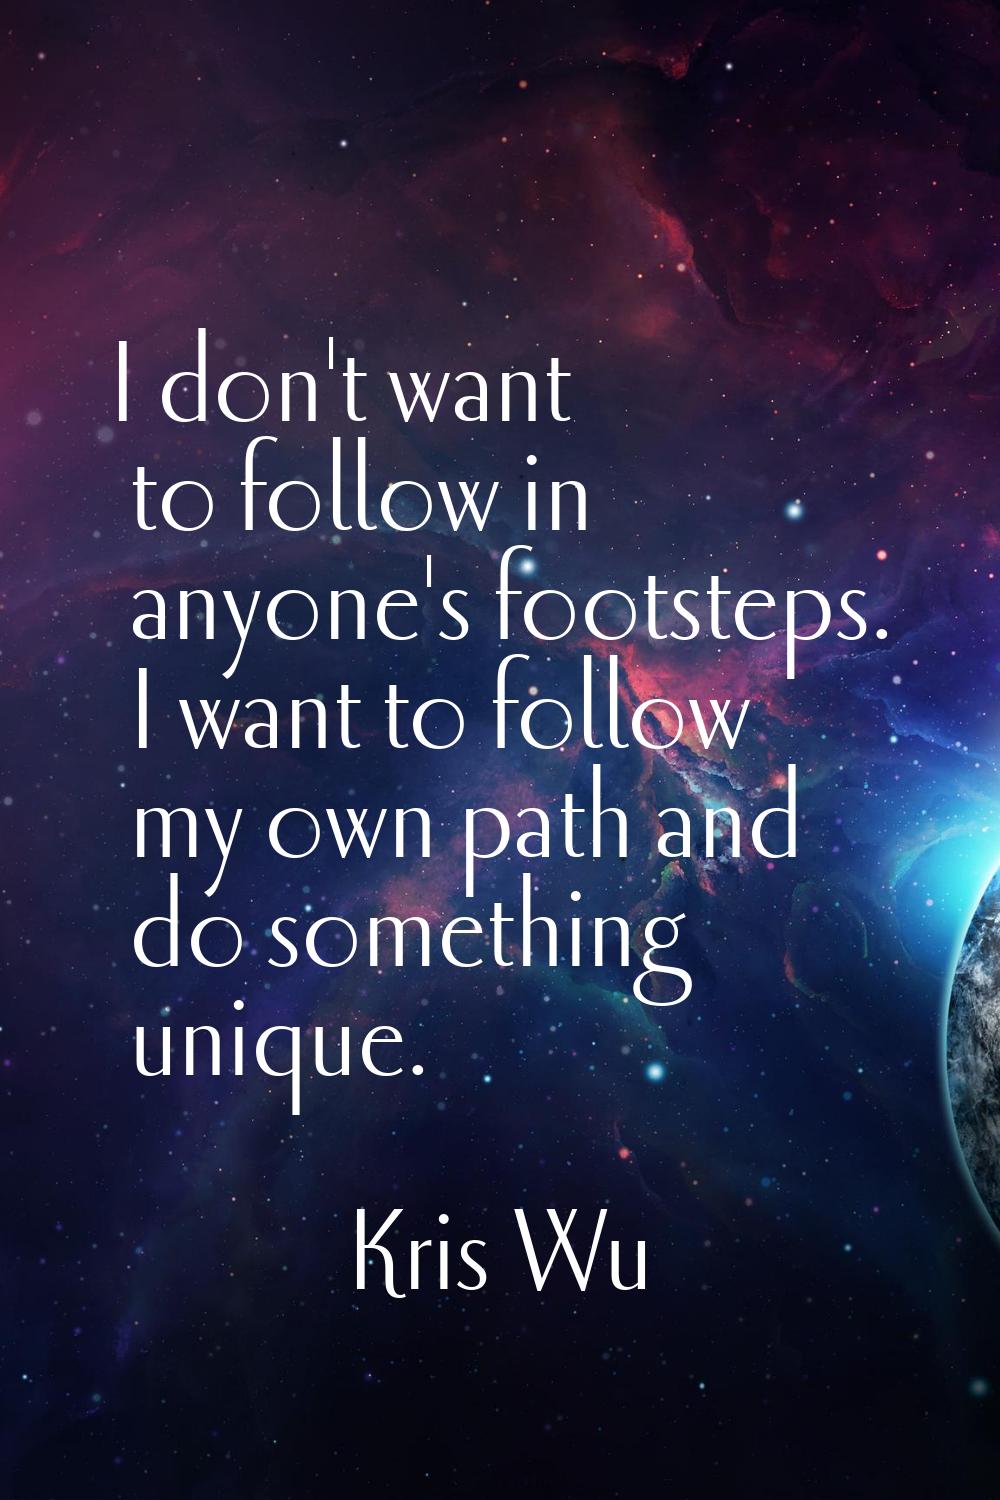 I don't want to follow in anyone's footsteps. I want to follow my own path and do something unique.